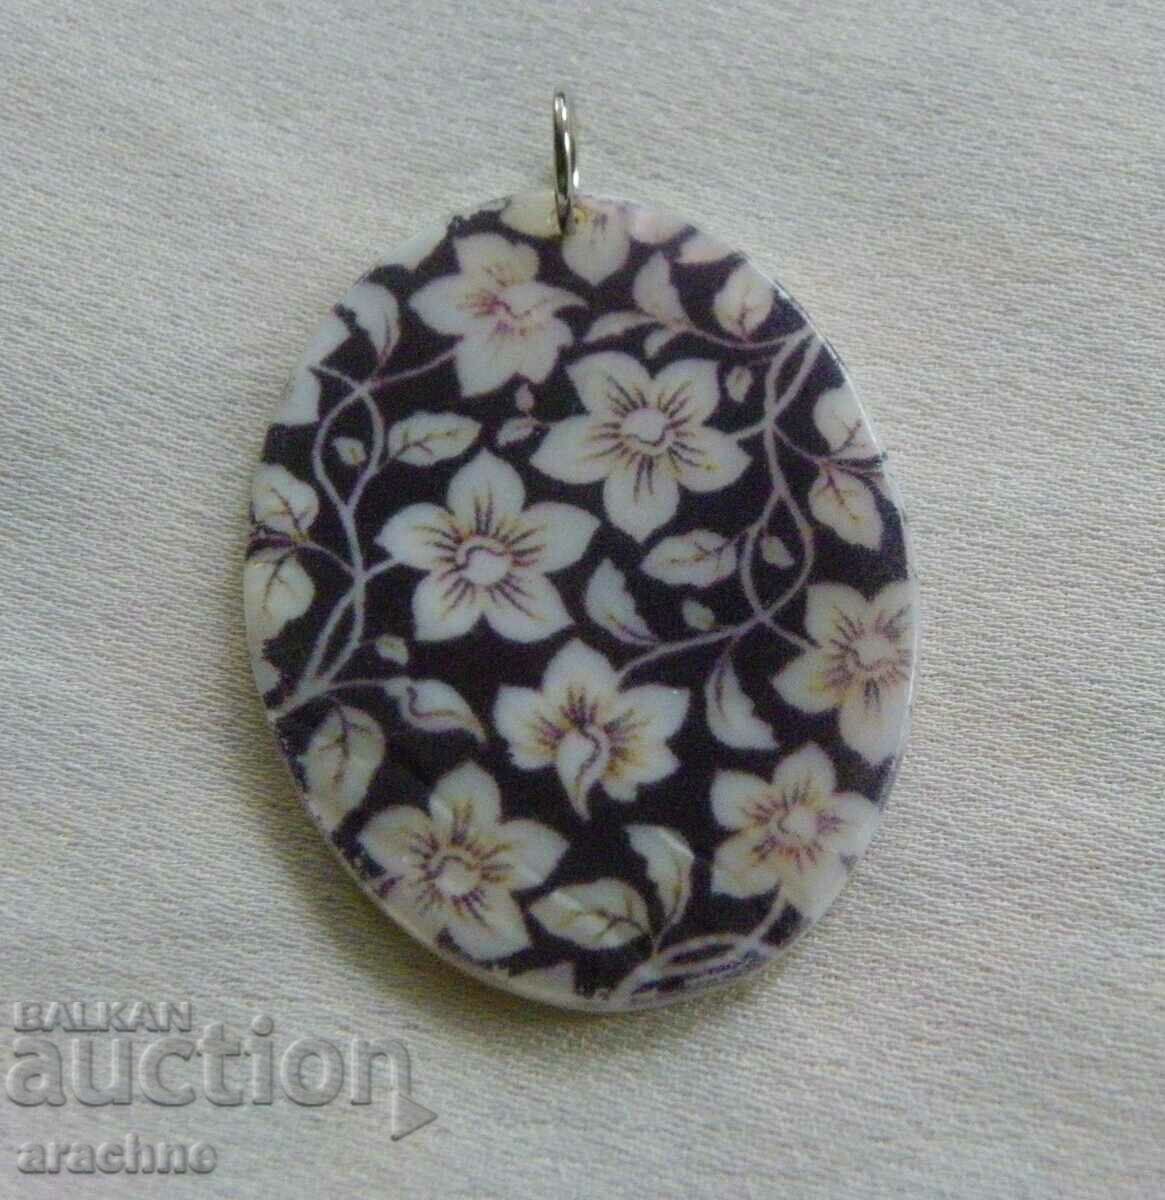 Japanese painted mother-of-pearl locket